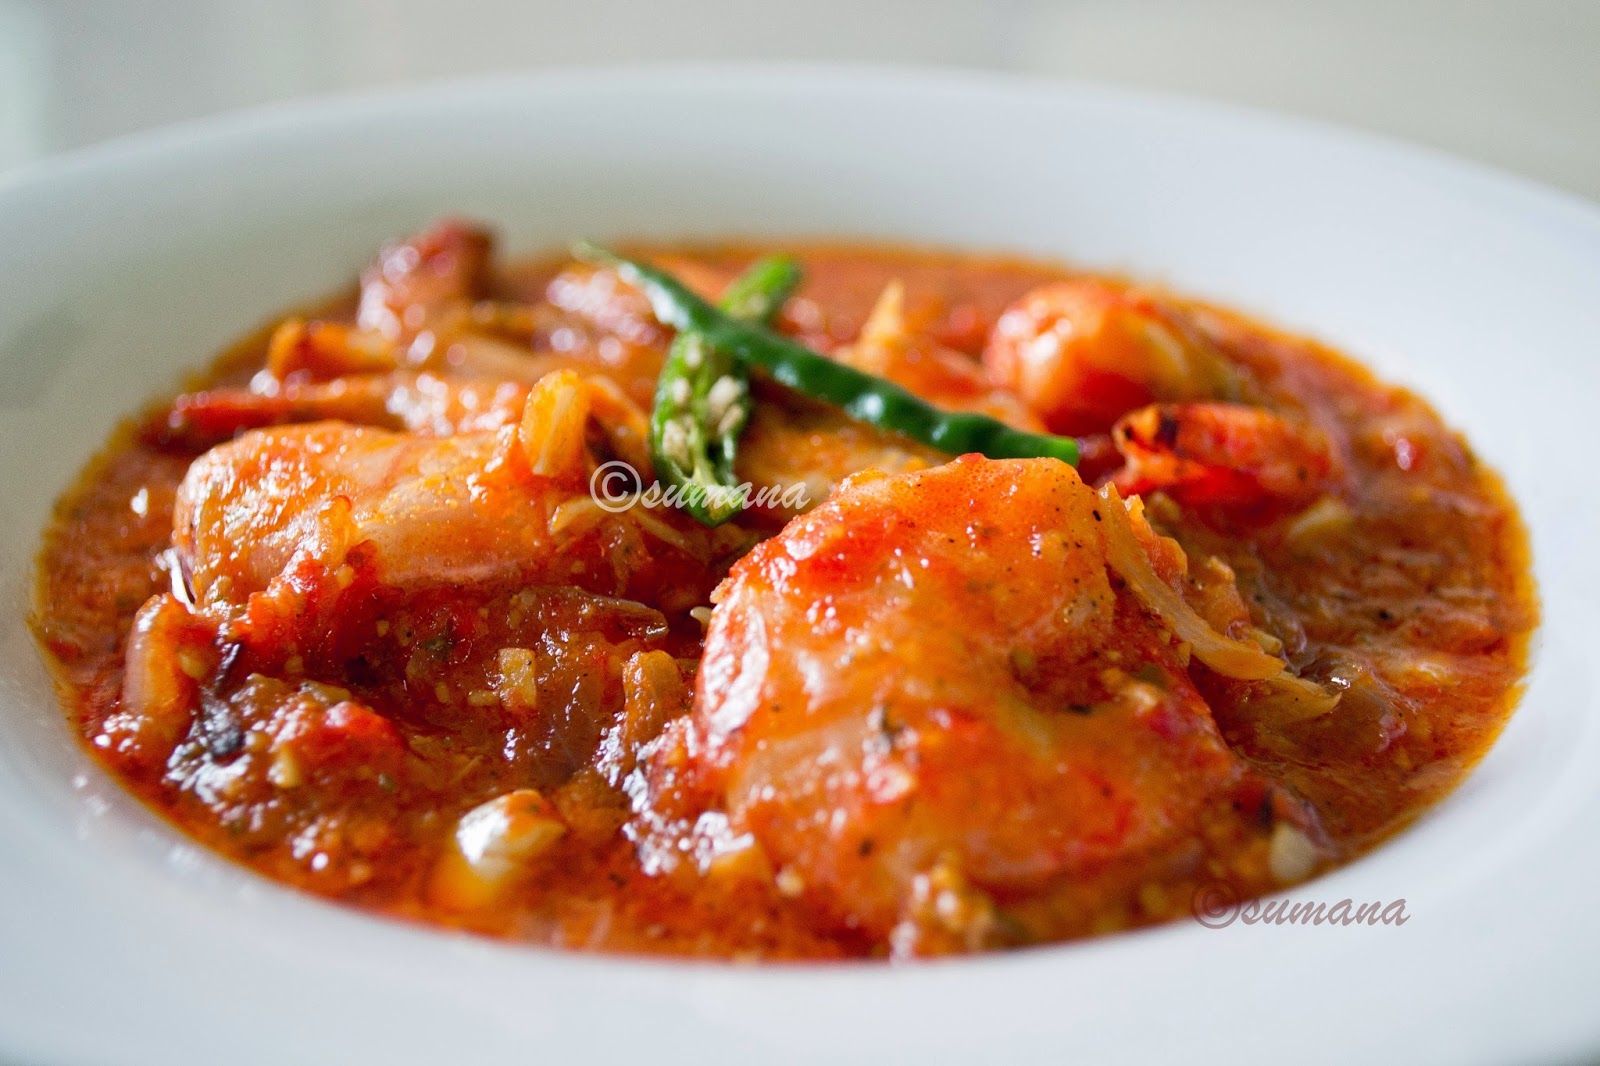 Gambus pil pil is a spicy prawn recipe with garlic chilli and olive oil